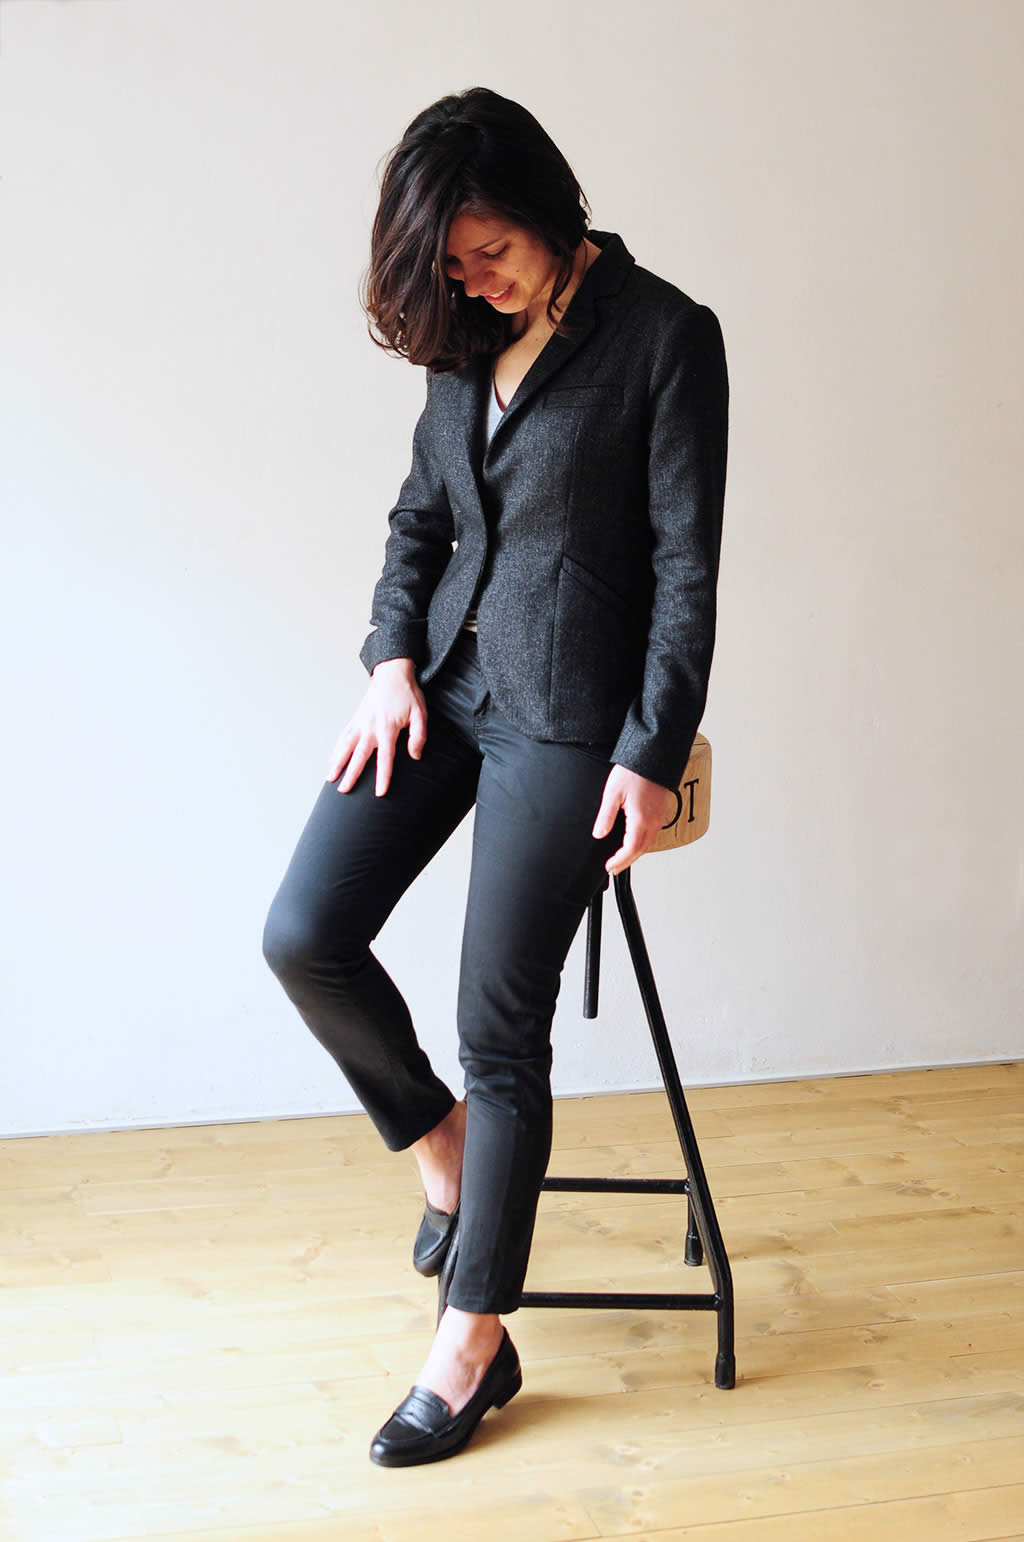 ladulsatina - Sewing blog - Self-drafted blazer - outfit